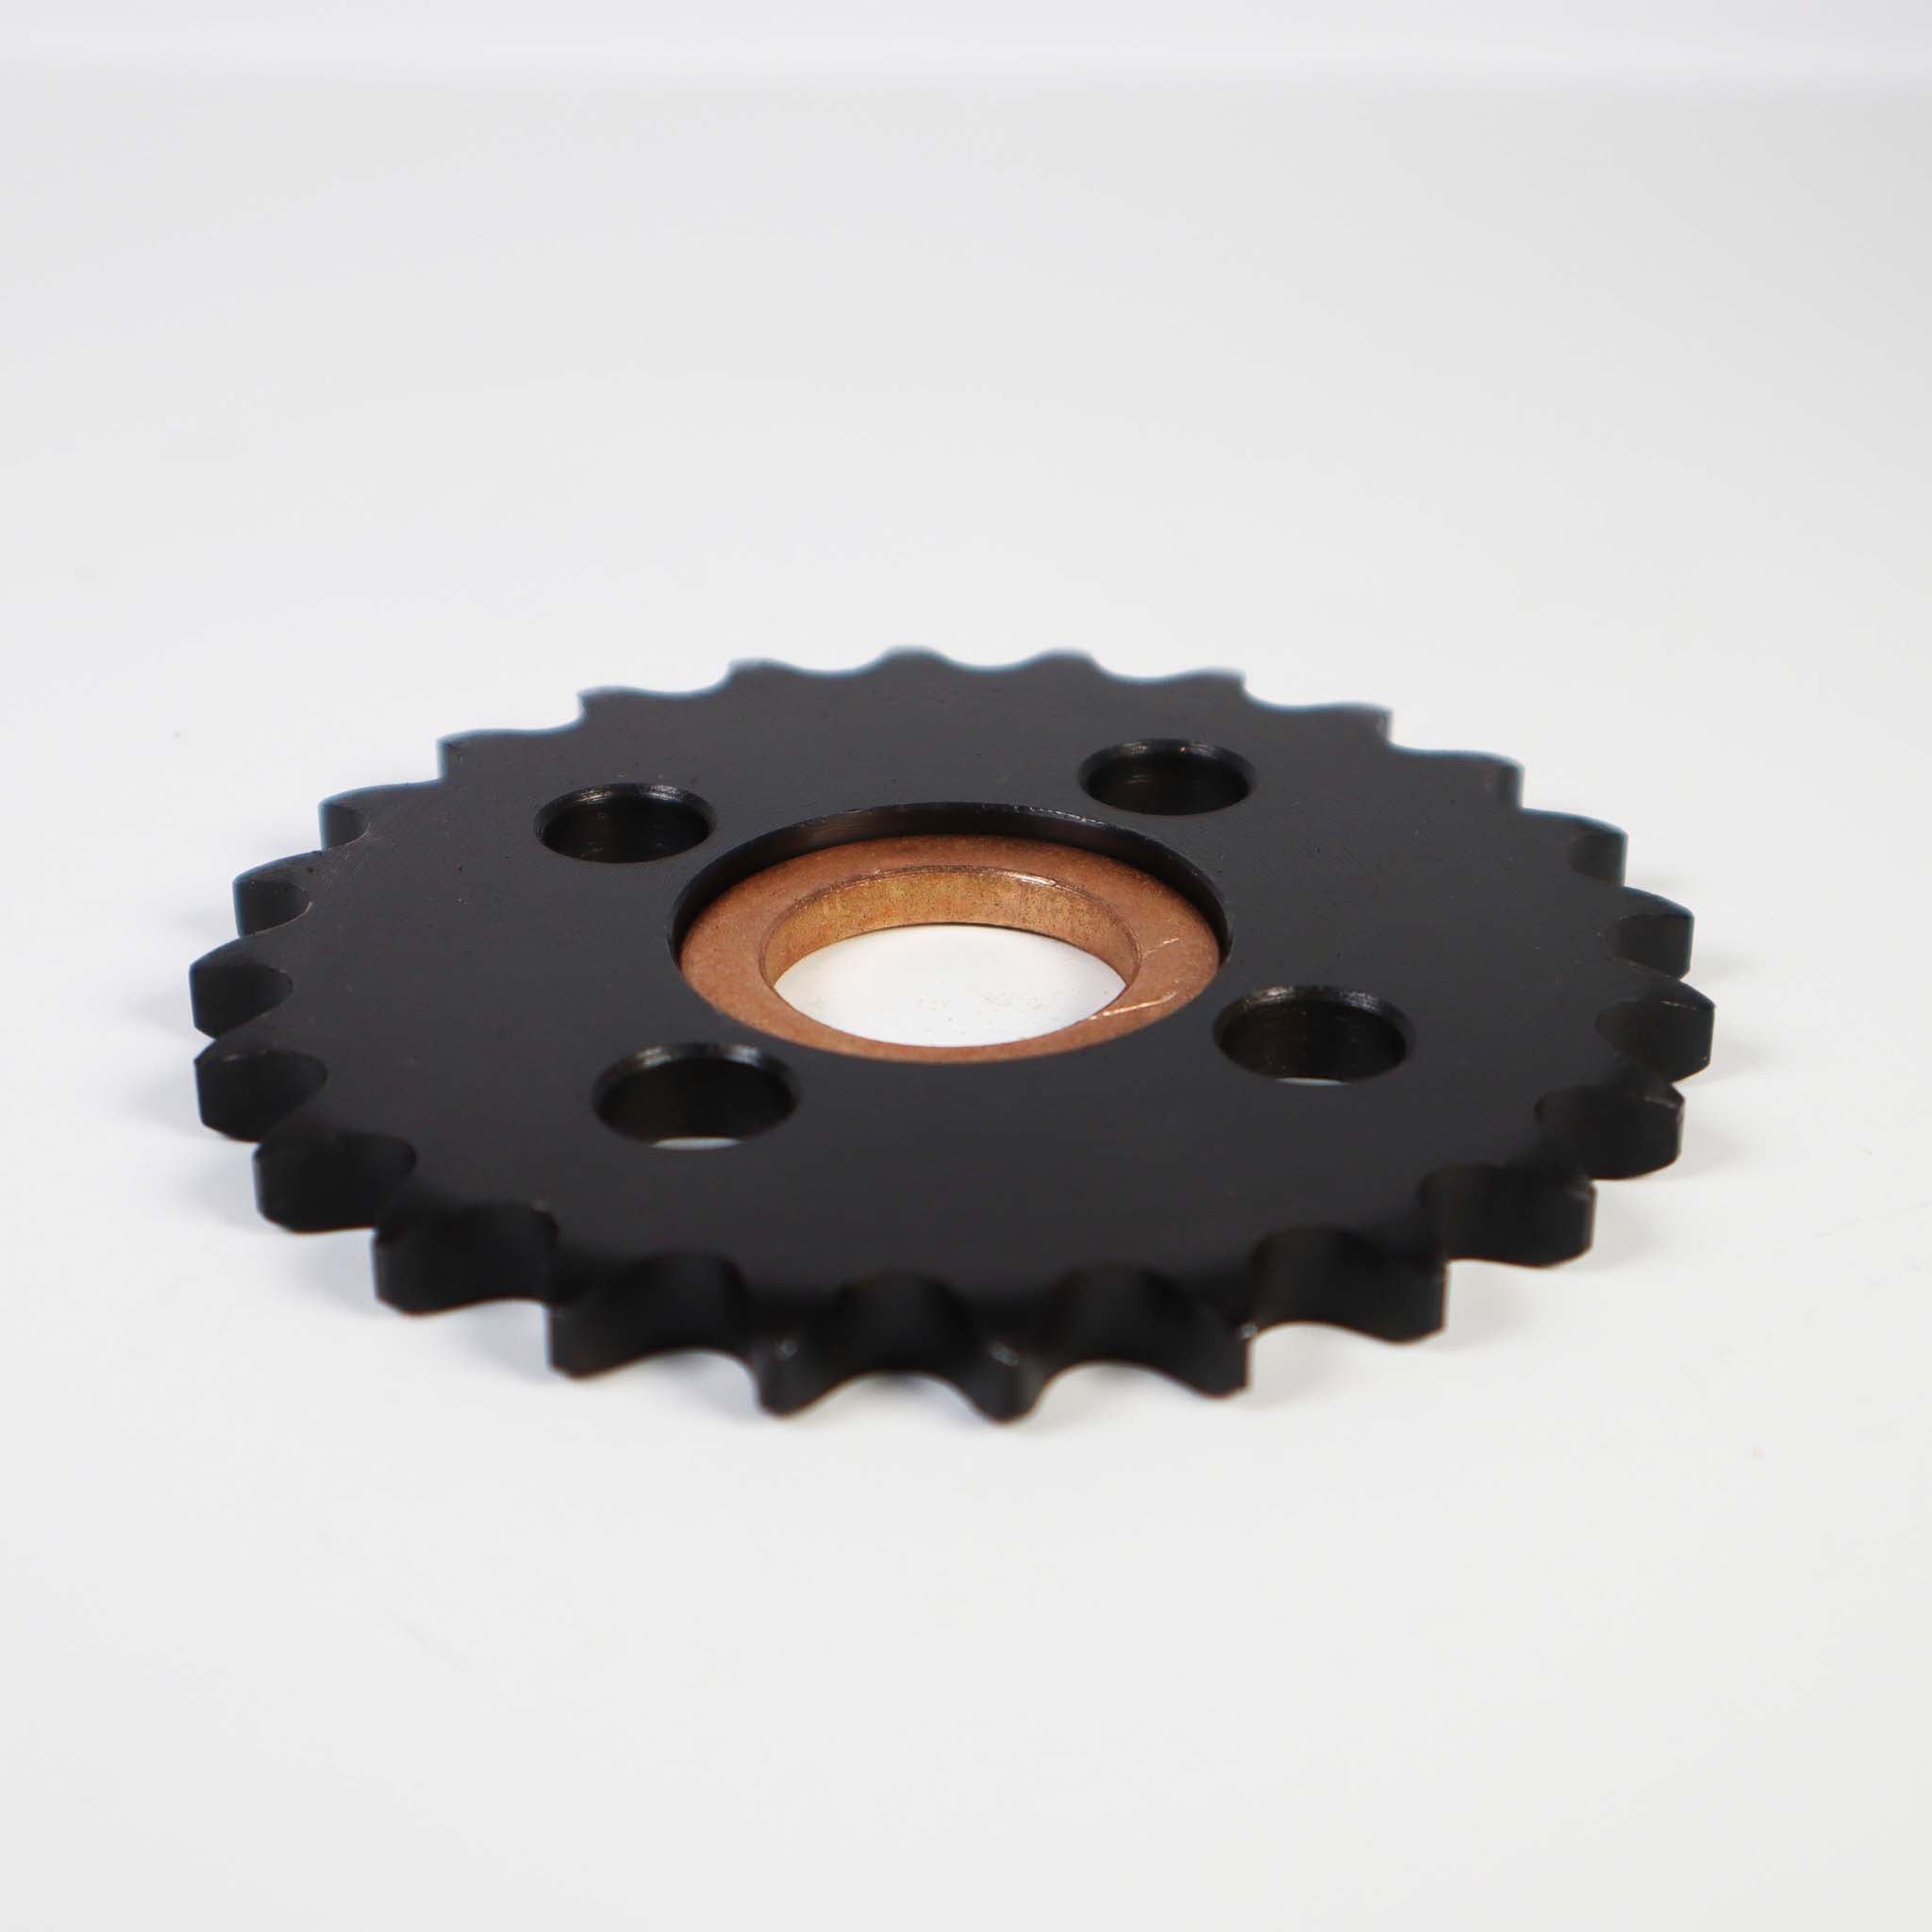 Linear 2110-364 Sprocket, 40 A 24, with Bearing